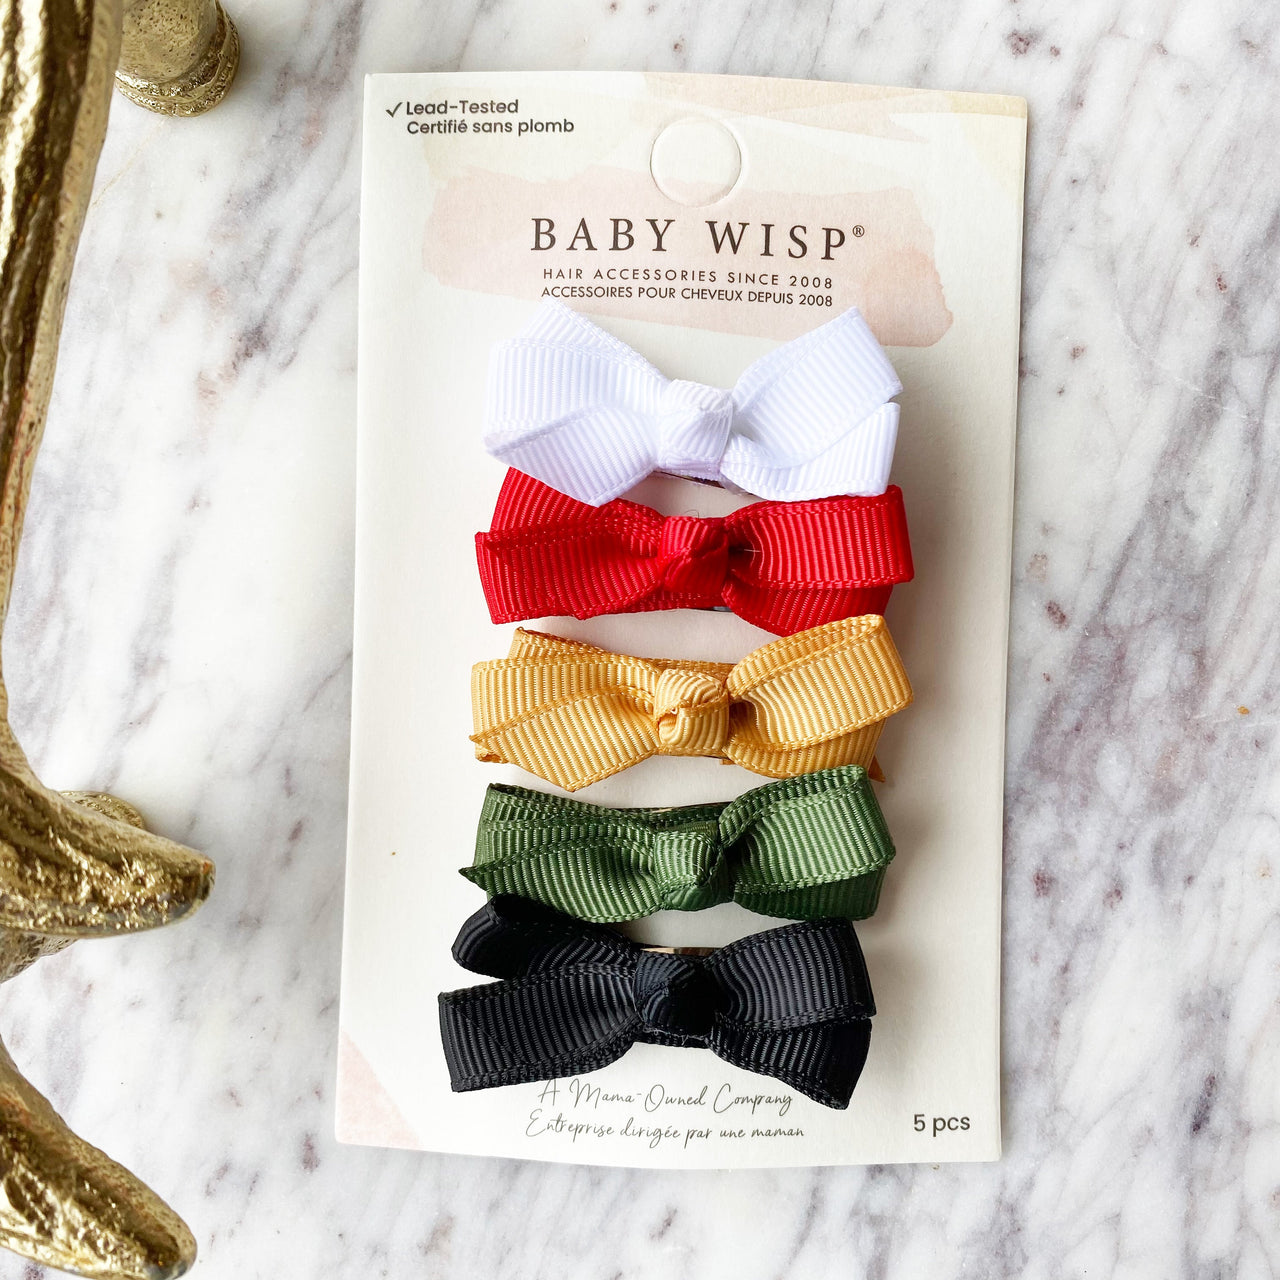 Baby Wisp 10 PC Small Snap Charlotte Hair Bows - Let Live